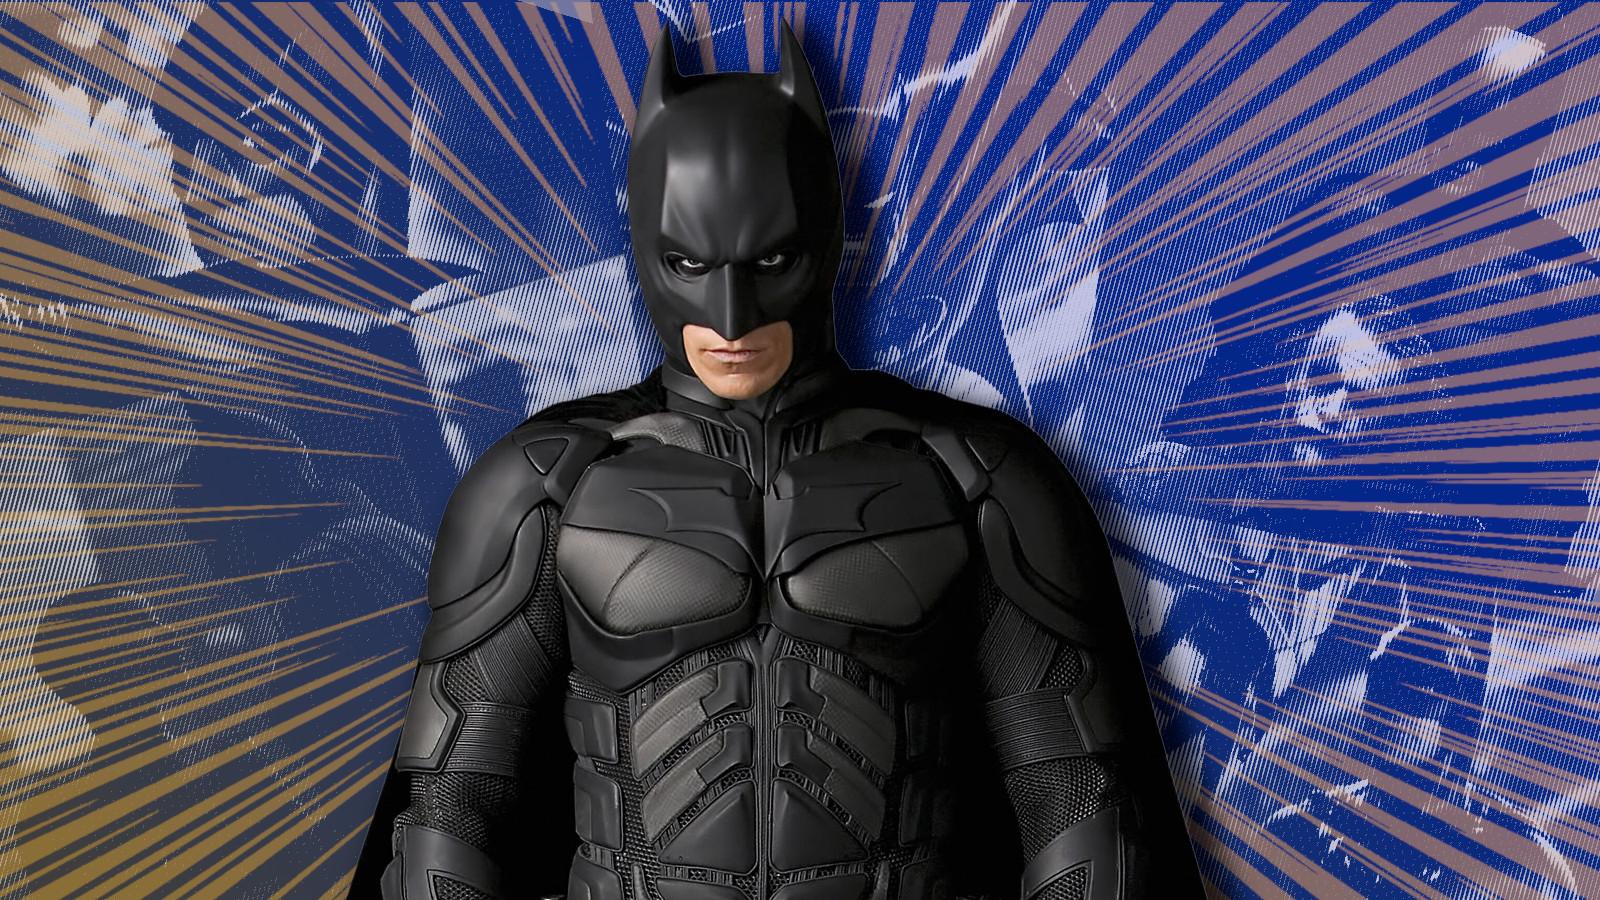 Christian Bales Batman leads our ranking of all the Batman movies.